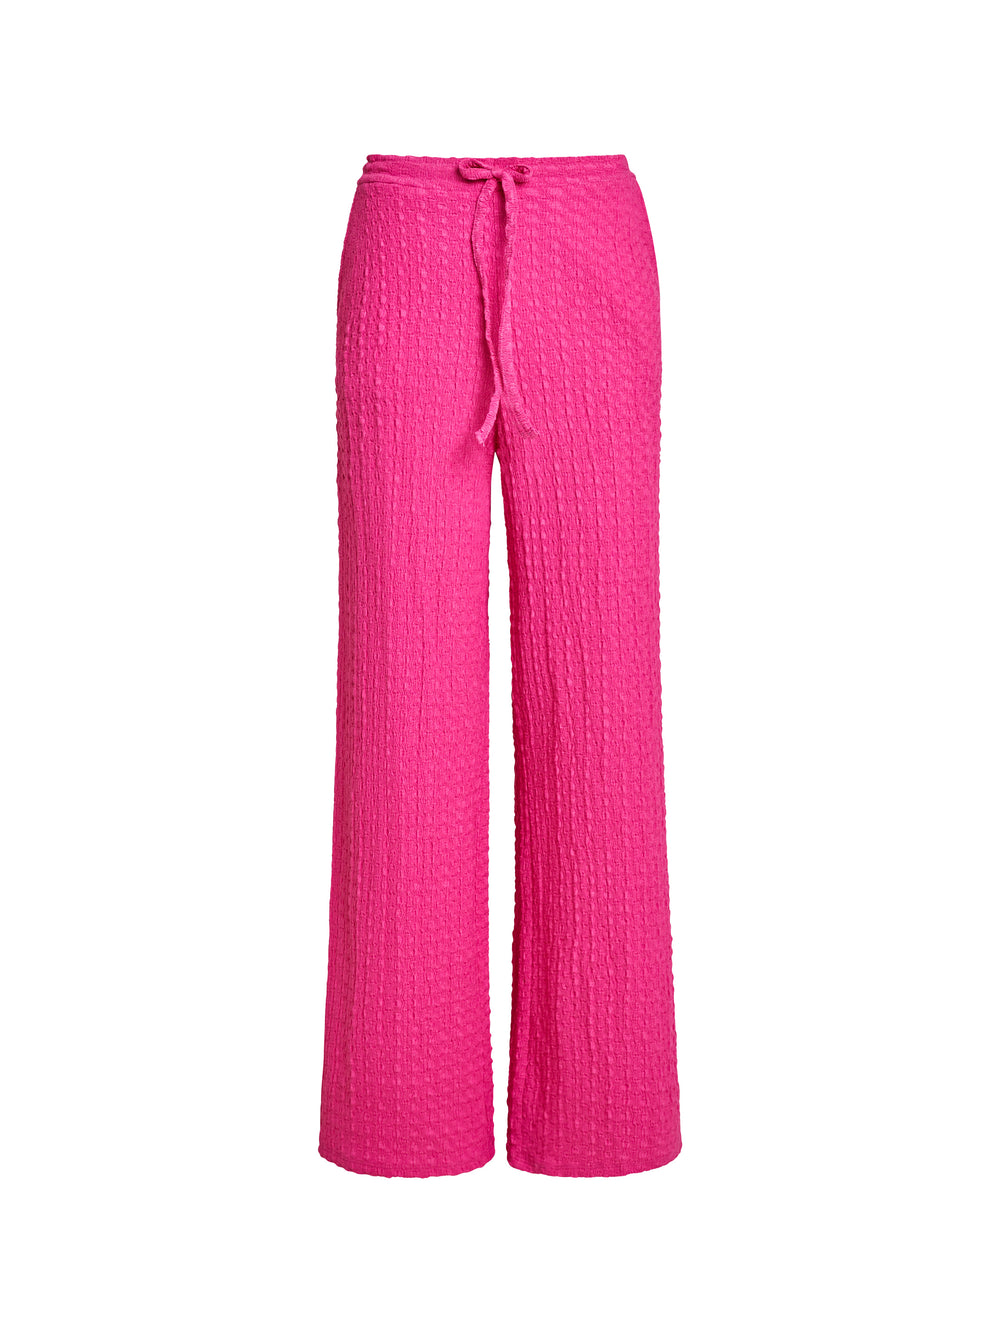 Tash Textured Pants Fuchsia | French Connection US